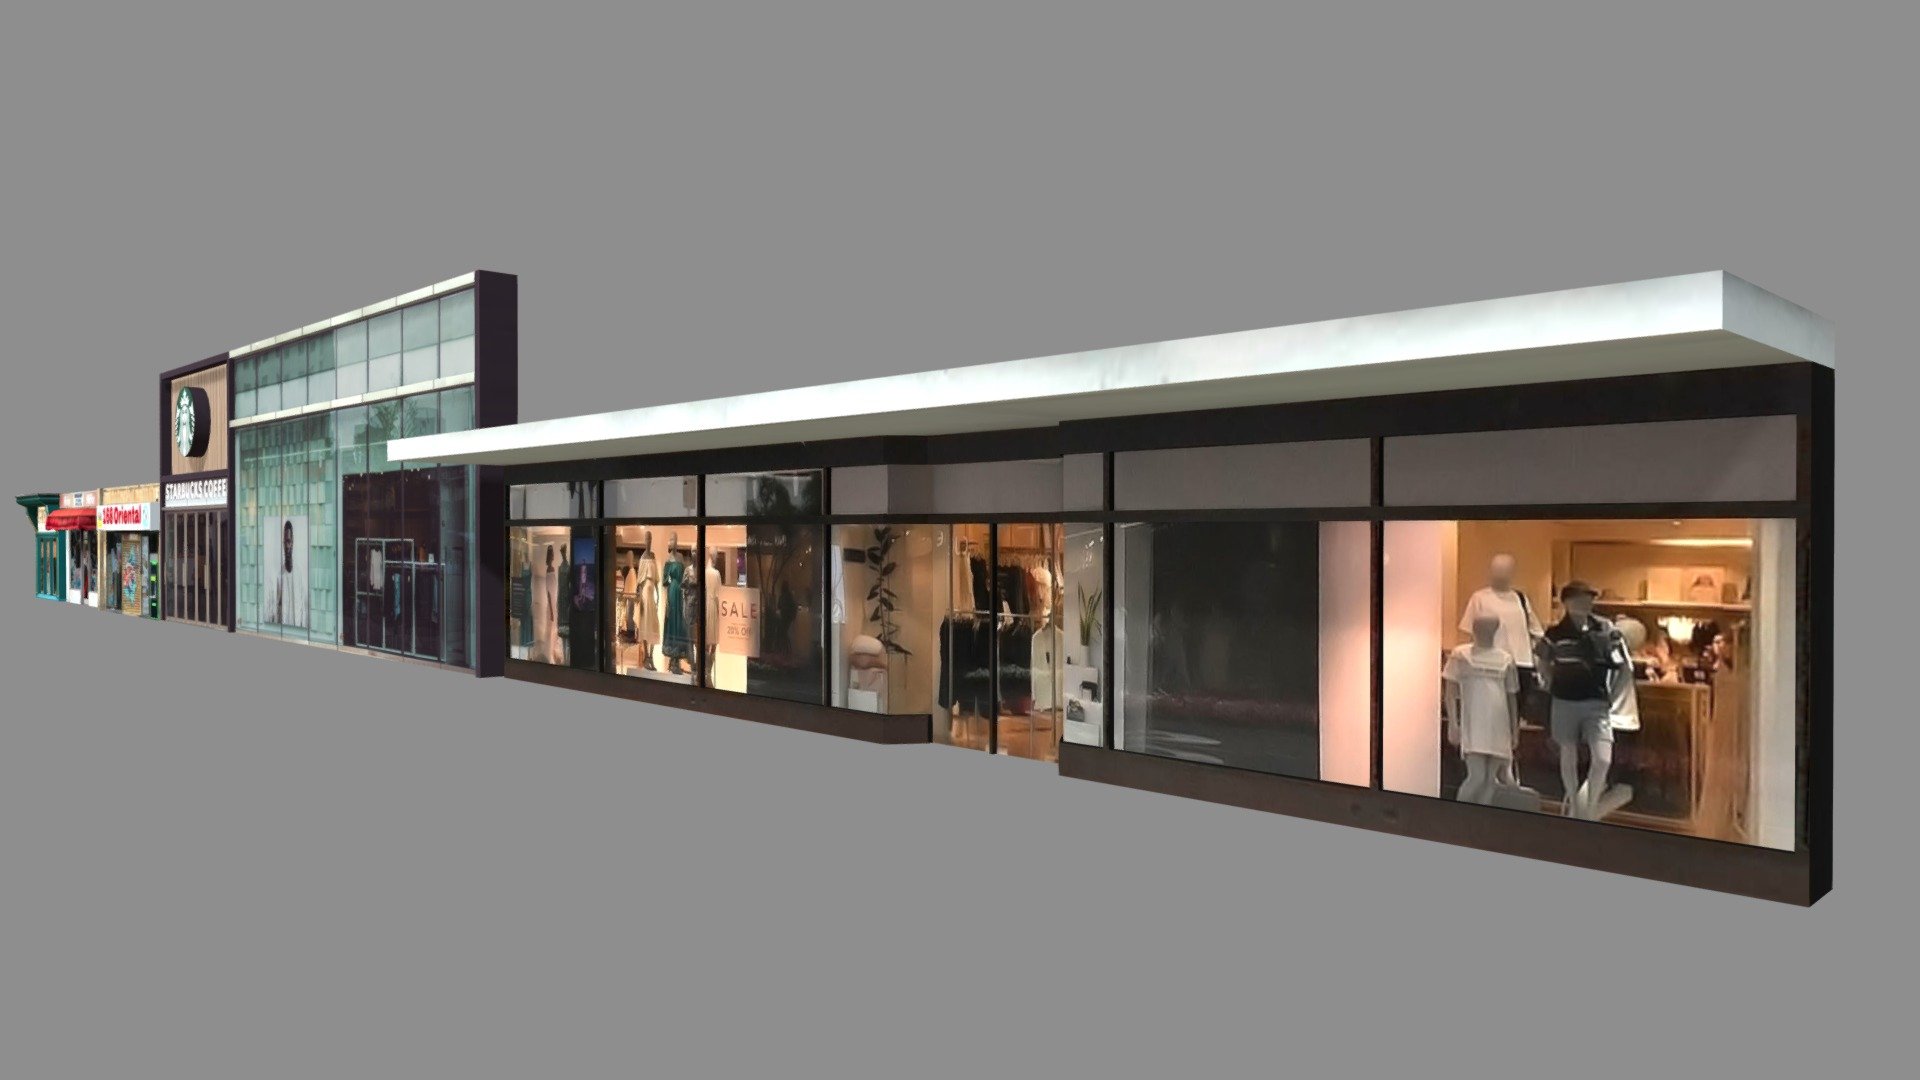 5 storefront low-poly models, perfect for game engines. Each model comes with color, spec, and a metal map 3d model